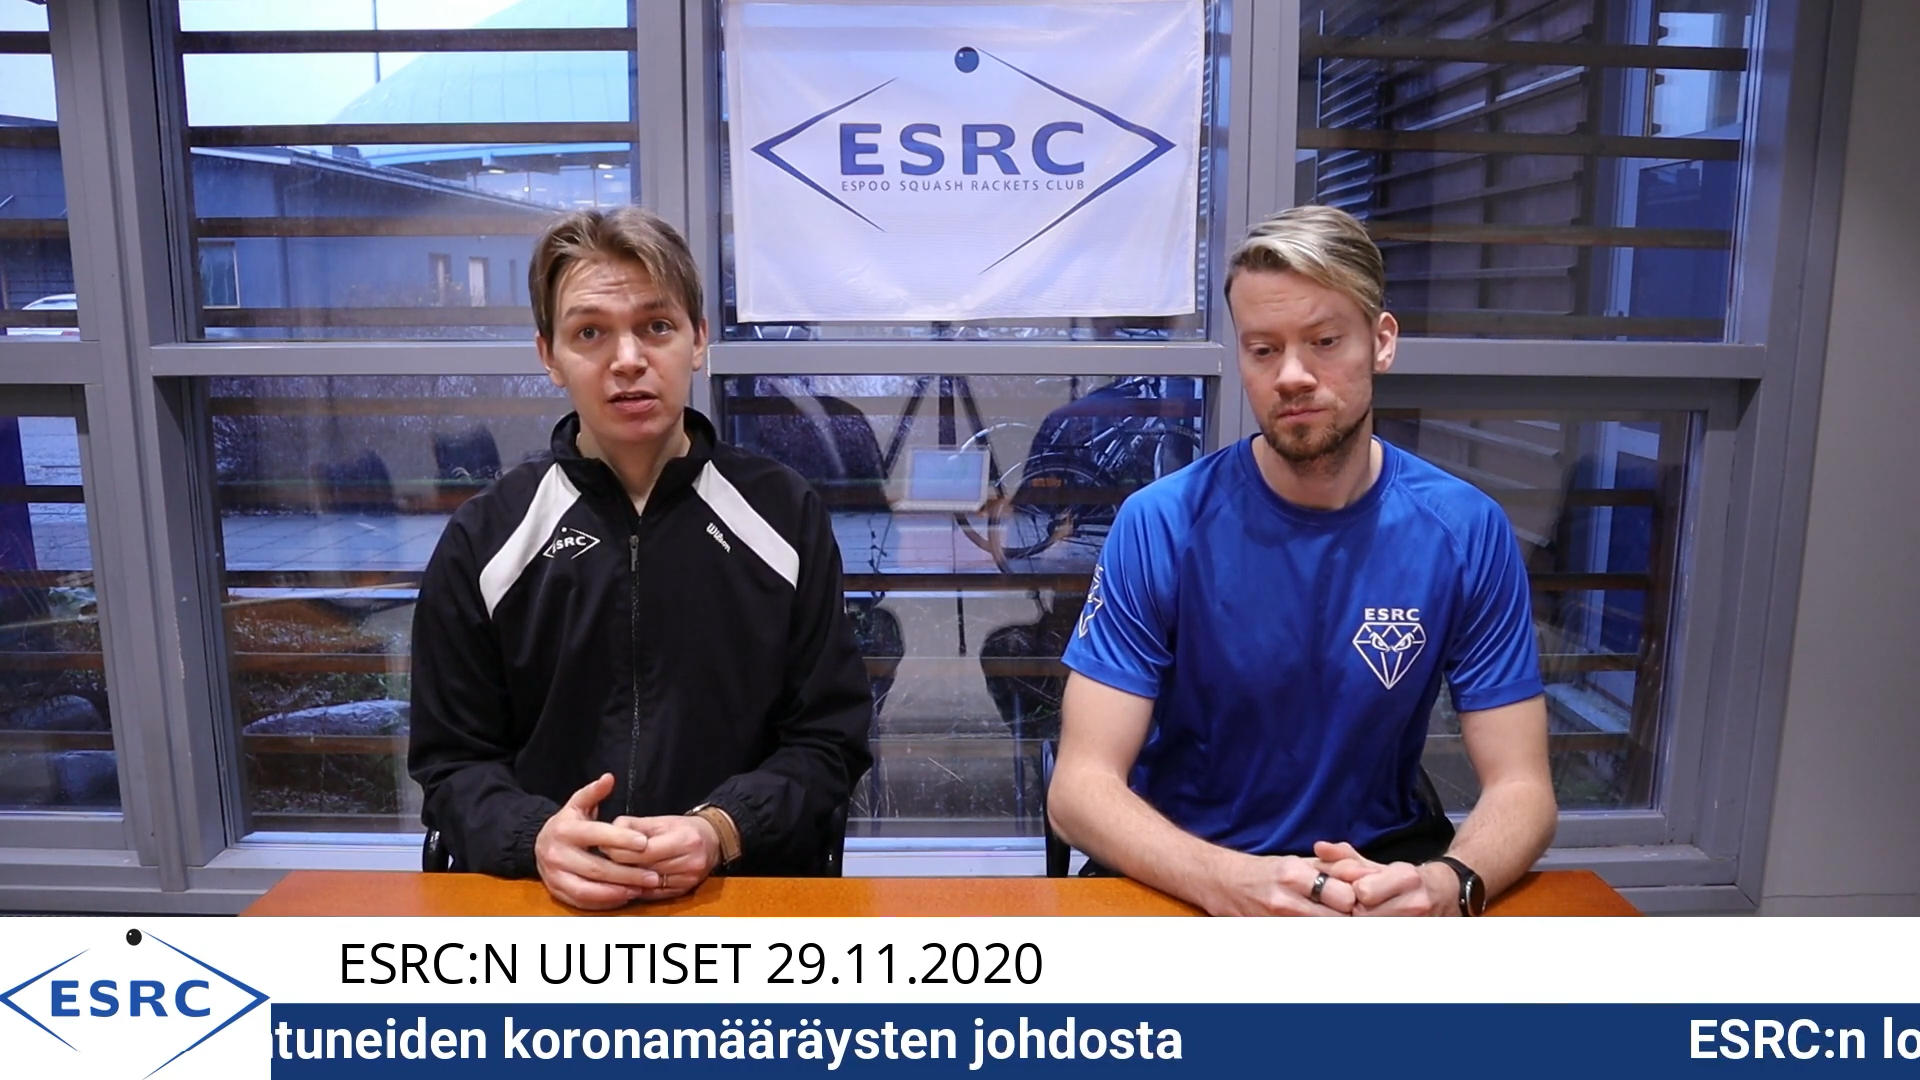 You are currently viewing ESRC:n UUTISET #2 29.11.2020